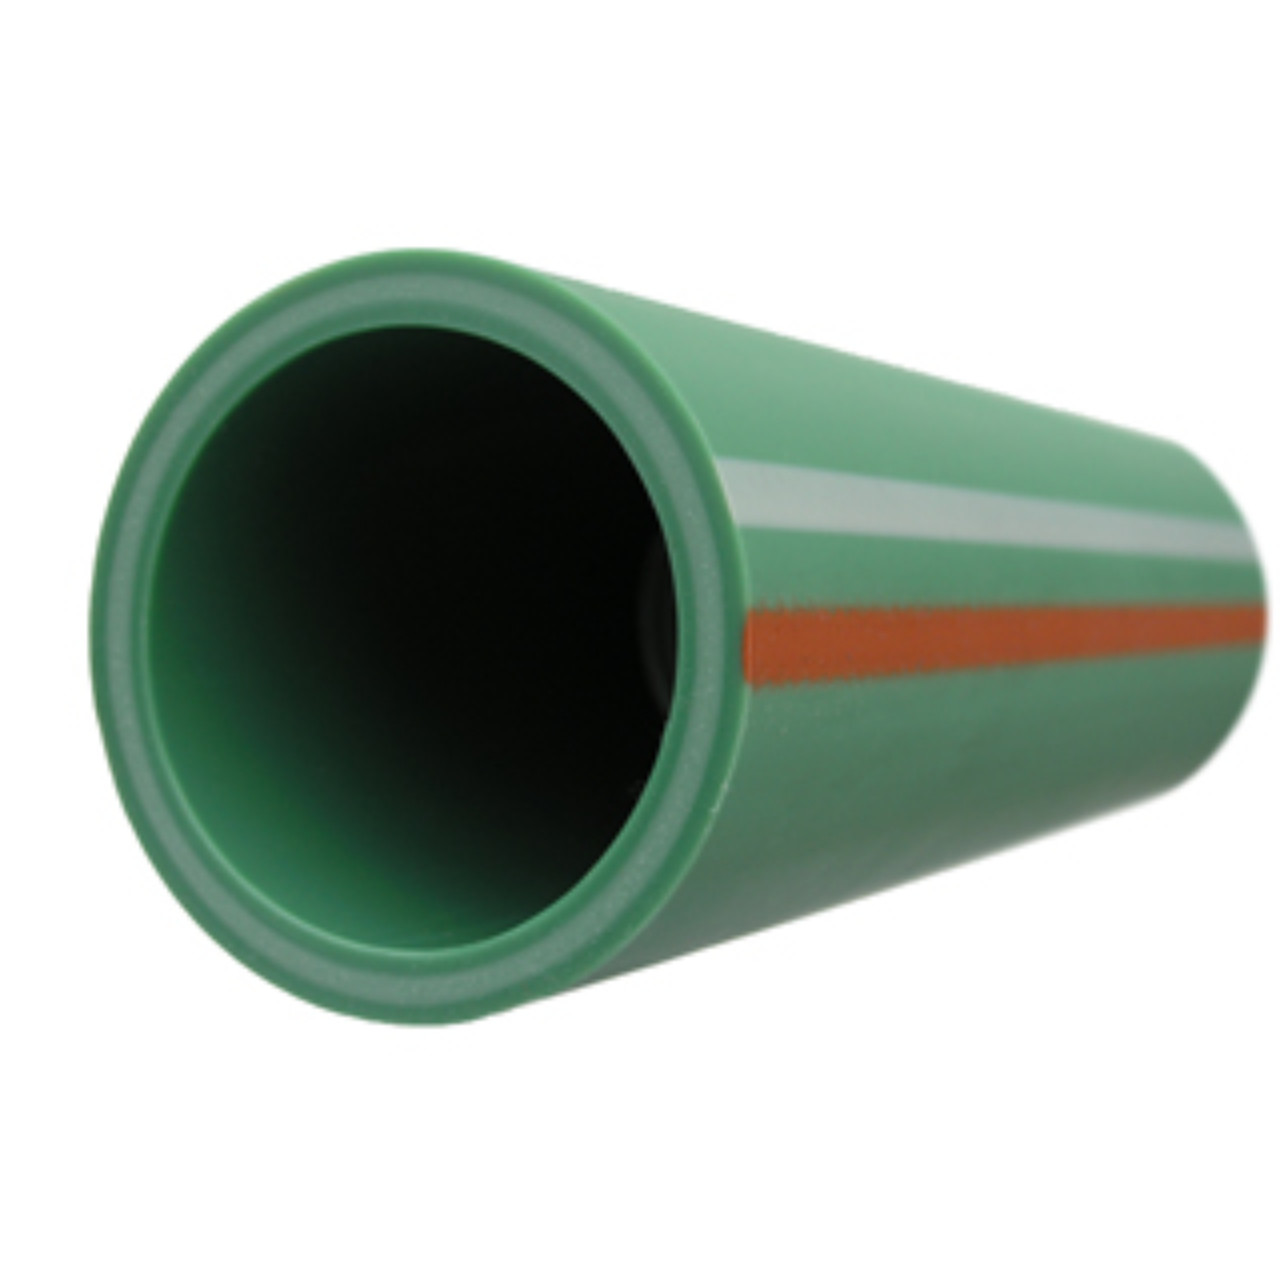 DYNATHERM PP-R CT Faser Pressure Pipe "Climatec" PN16 SDR11 - 4 metre length